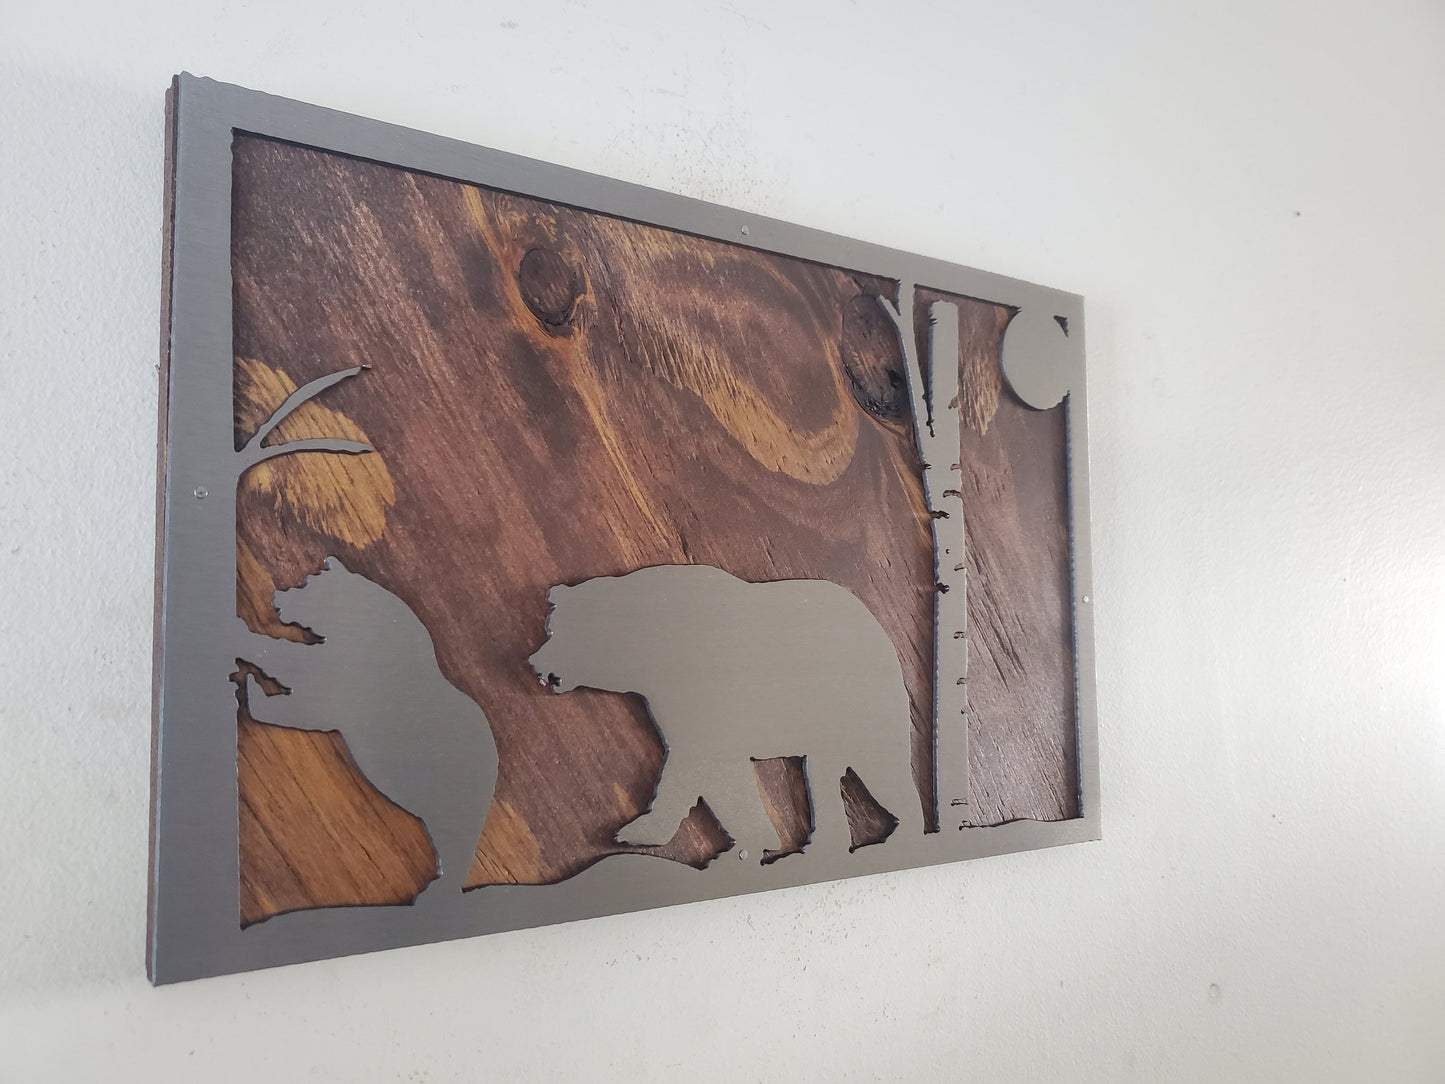 A close-up of a bear scene metal art wall decor made of clear coated steel, featuring intricate details and textures of a bear in its natural habitat. A perfect addition to any nature lover's home or office decor.